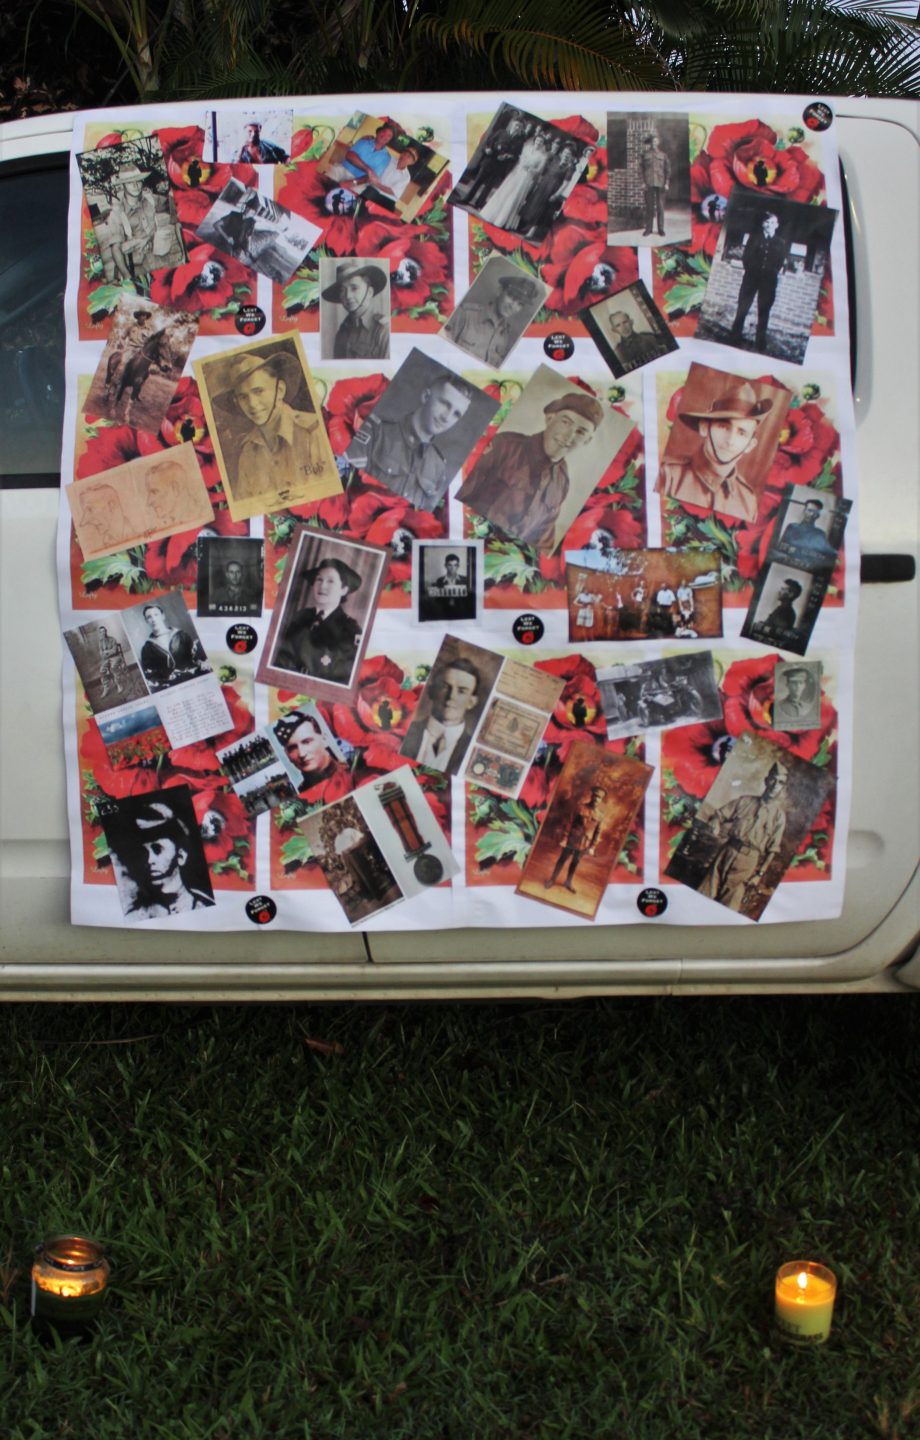 Collage of people dressed in army uniforms attached to side of white vehicle. Two candles on grass in foreground.